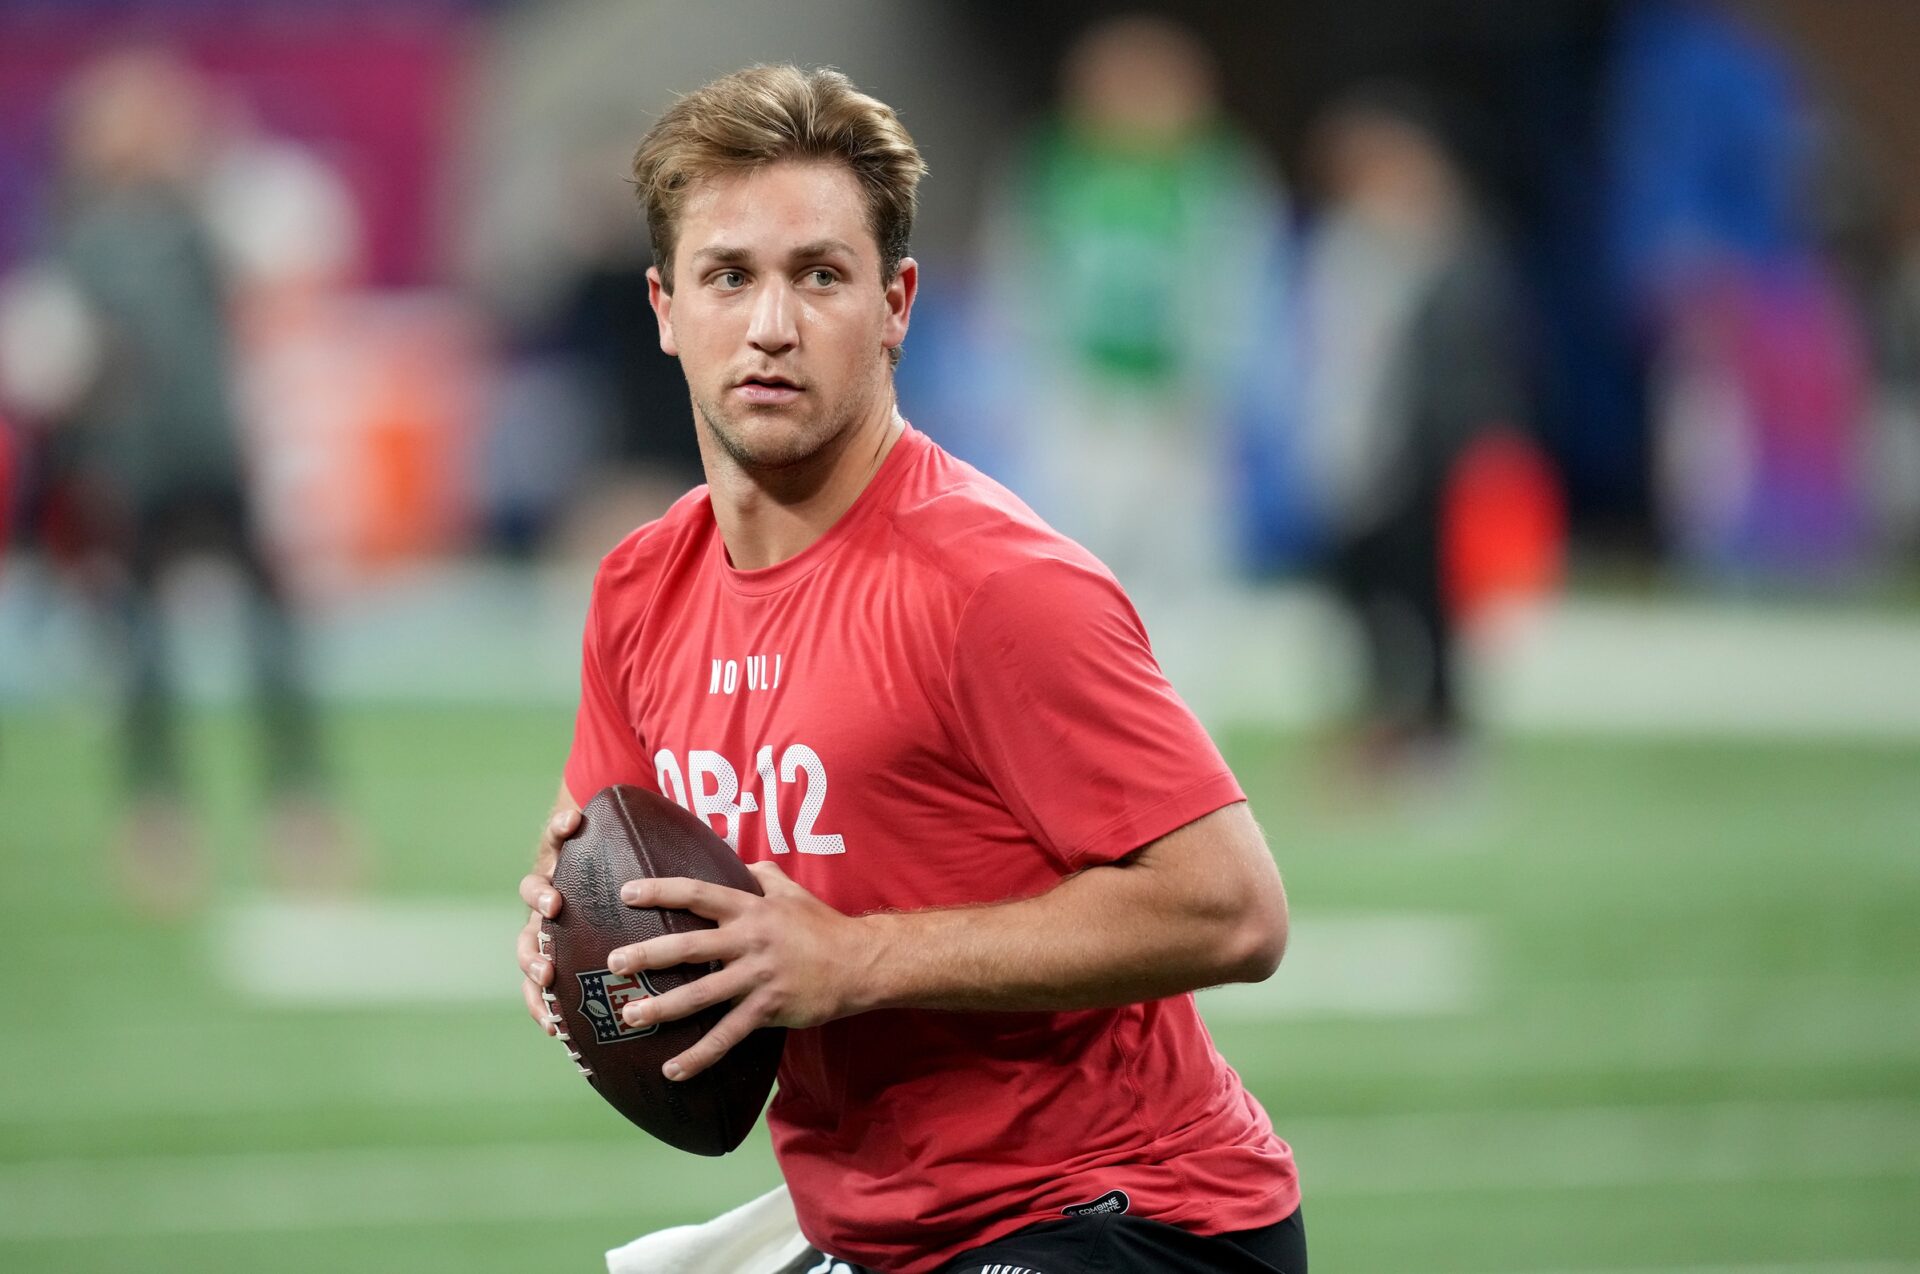 Mar 2, 2024; Indianapolis, IN, USA; Brigham Young quarterback Kedon Slovis (QB12) during the 2024 NFL Combine at Lucas Oil Stadium. Mandatory Credit: Kirby Lee-USA TODAY Sports